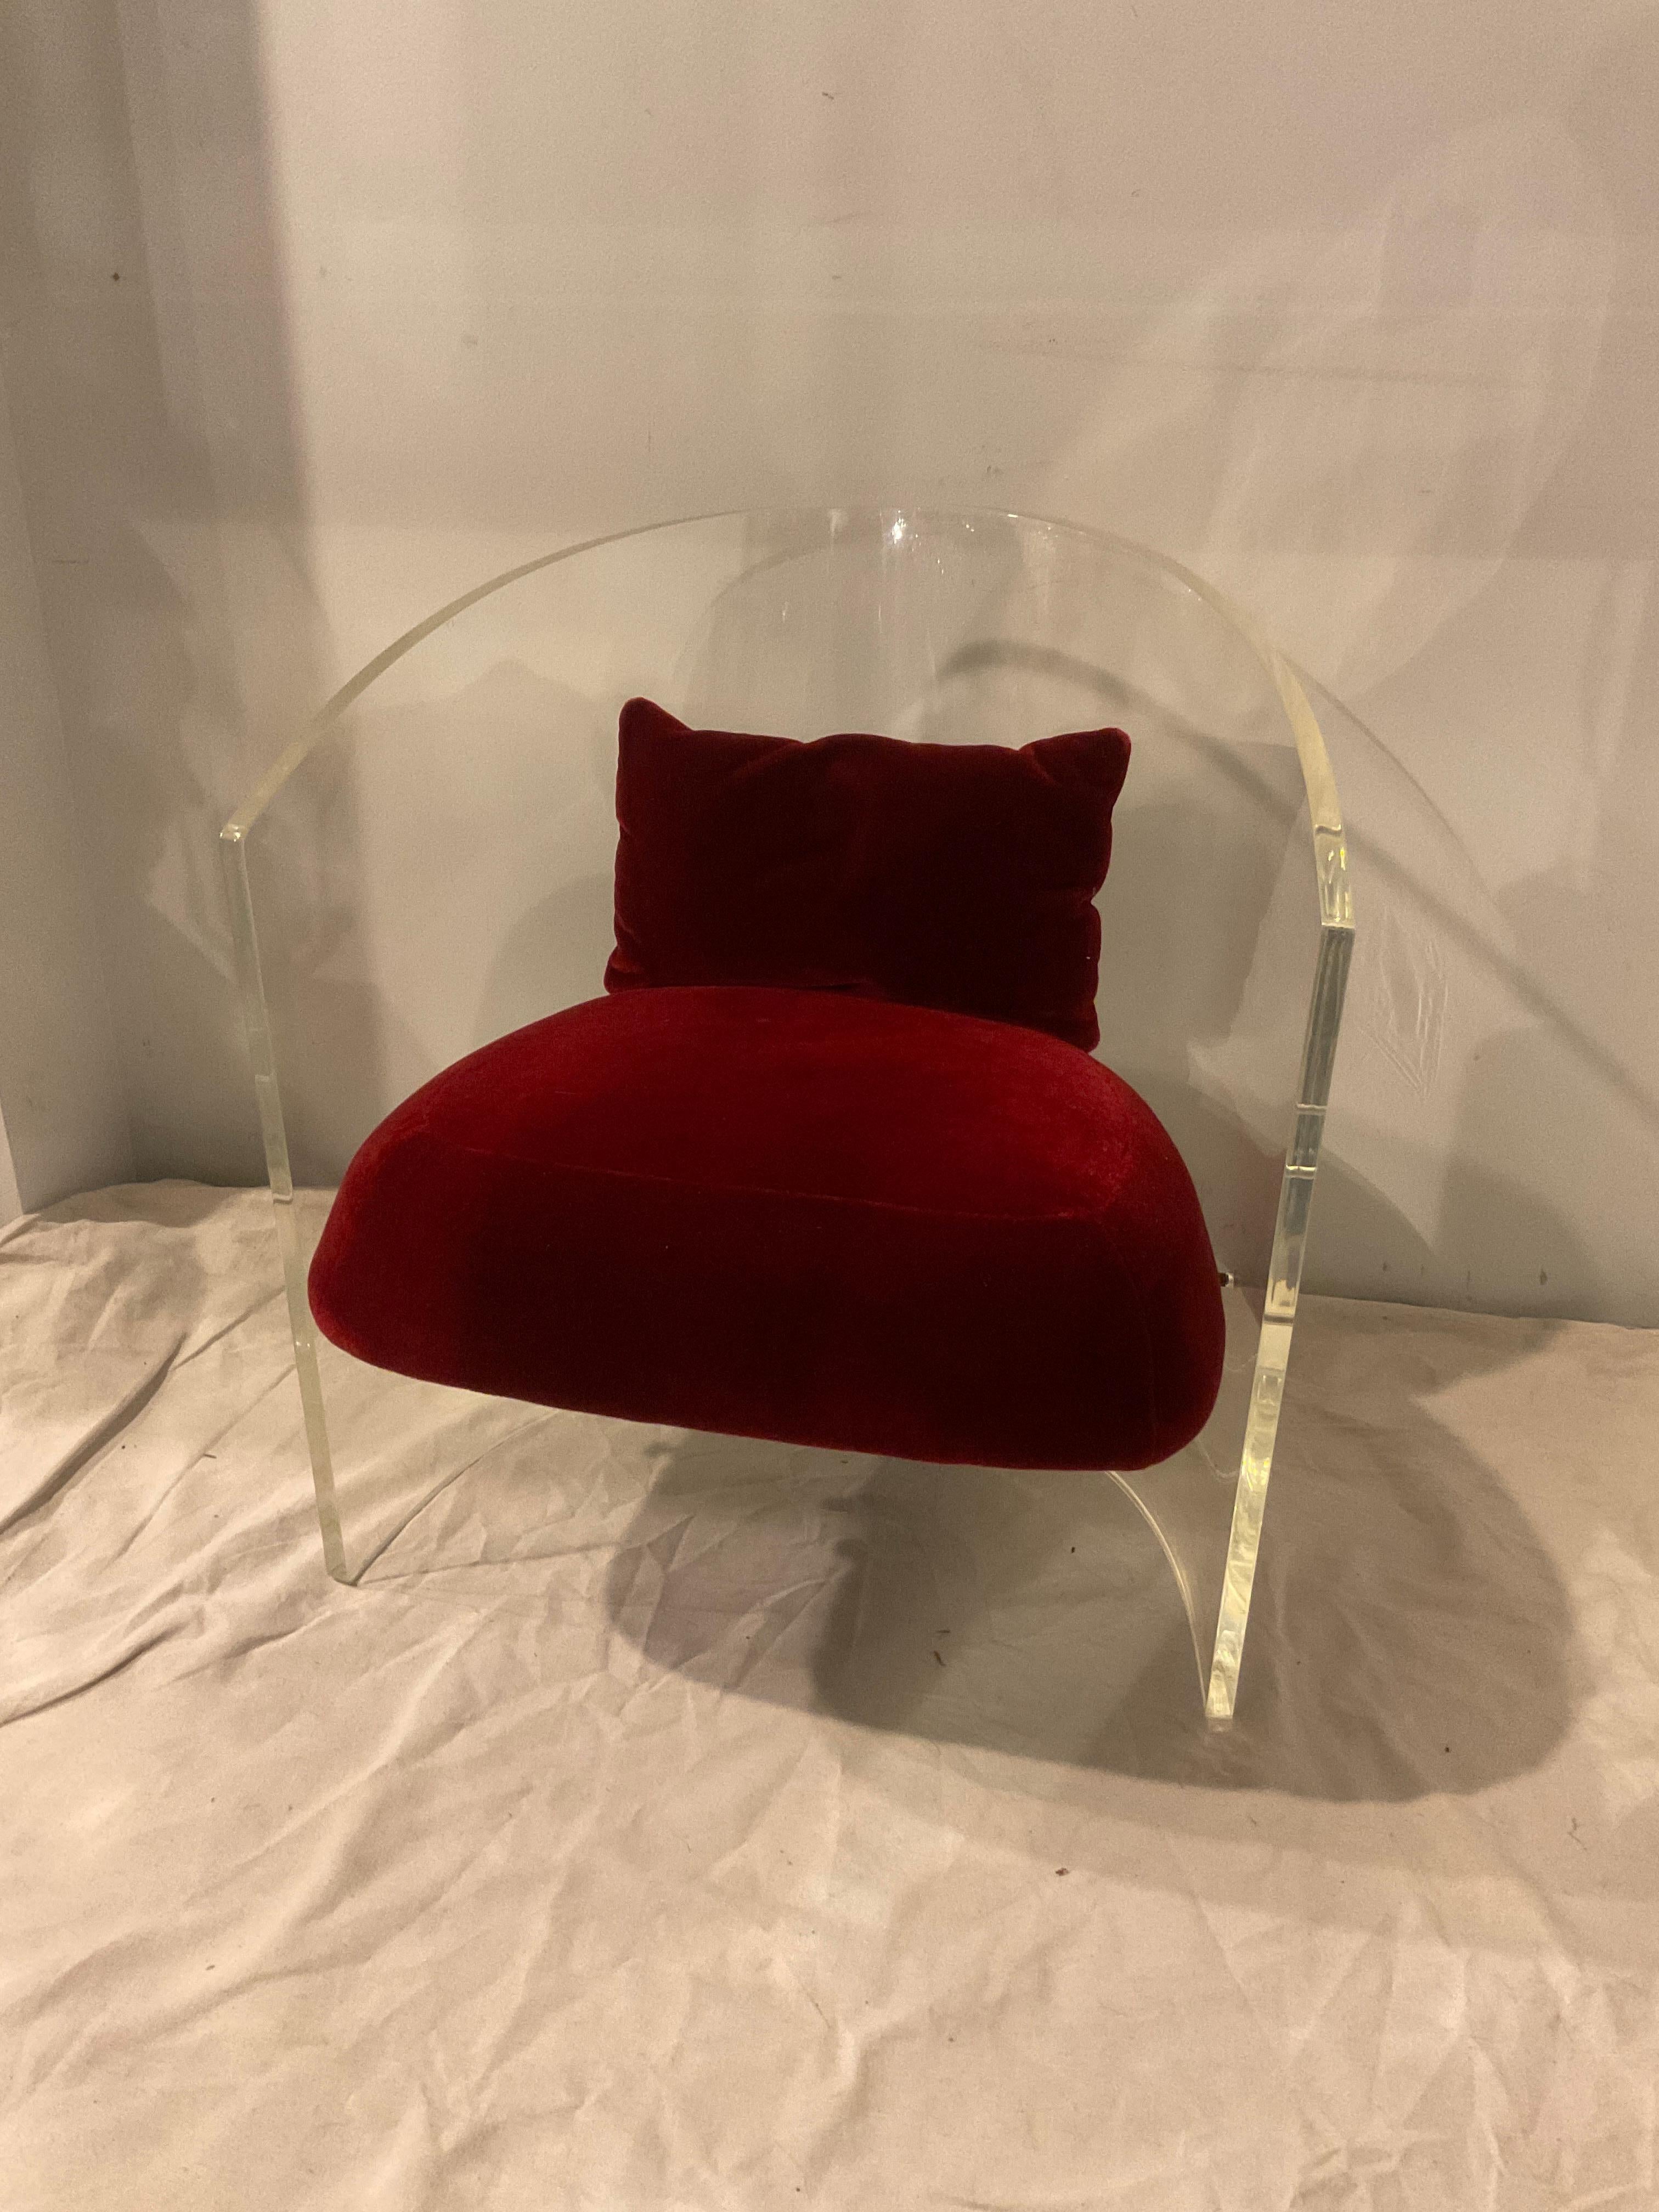 1990s Lucite barrel chair by Pace.
2 marks on chair as shown in last image. It might be able to be removed once the seat is taken off.